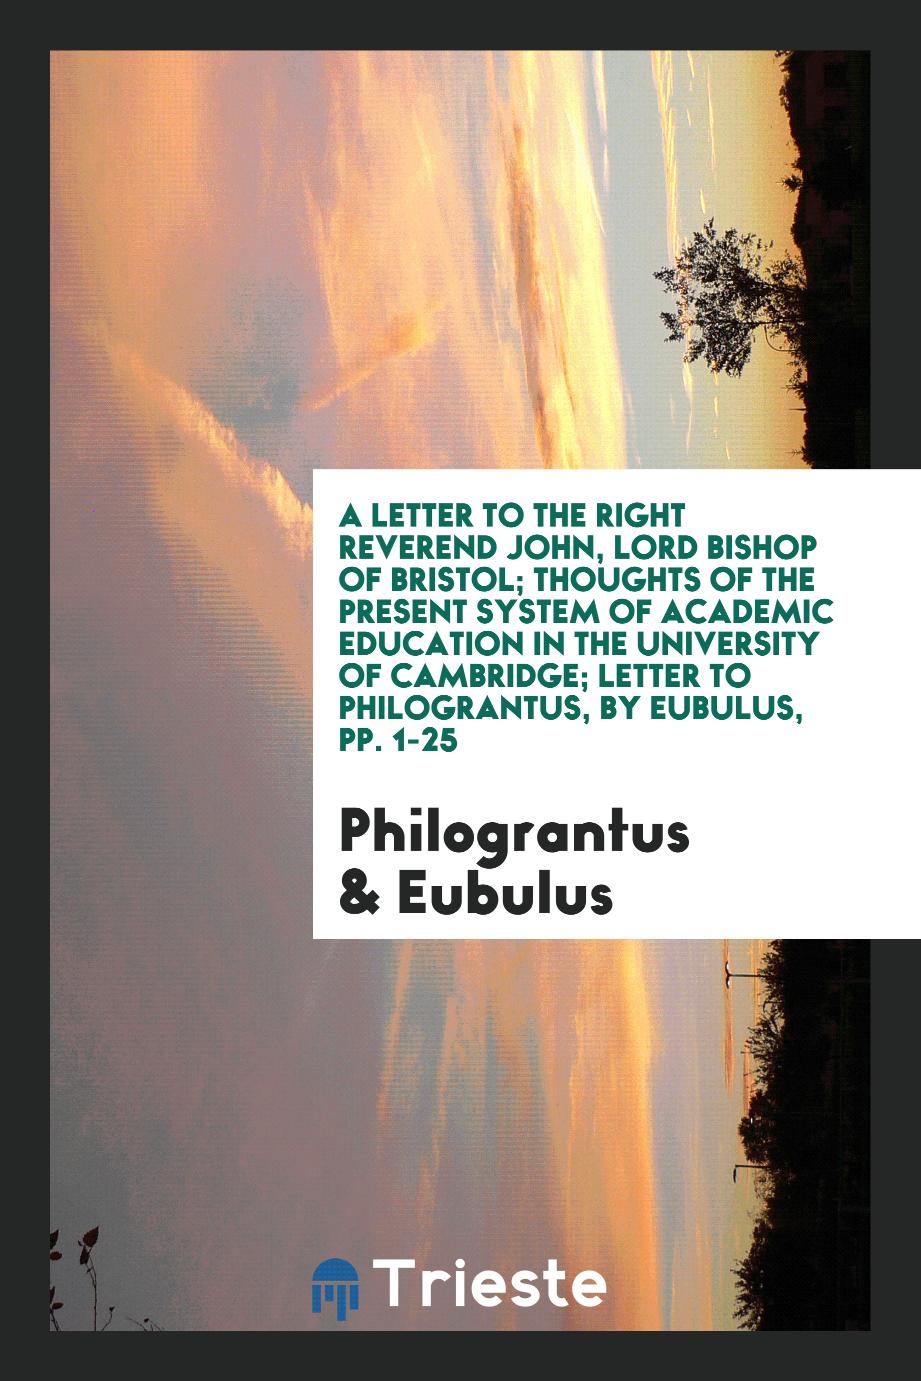 A Letter to the Right Reverend John, Lord Bishop of Bristol; Thoughts of the Present System of Academic Education in the University of Cambridge; Letter to Philograntus, by Eubulus, pp. 1-25